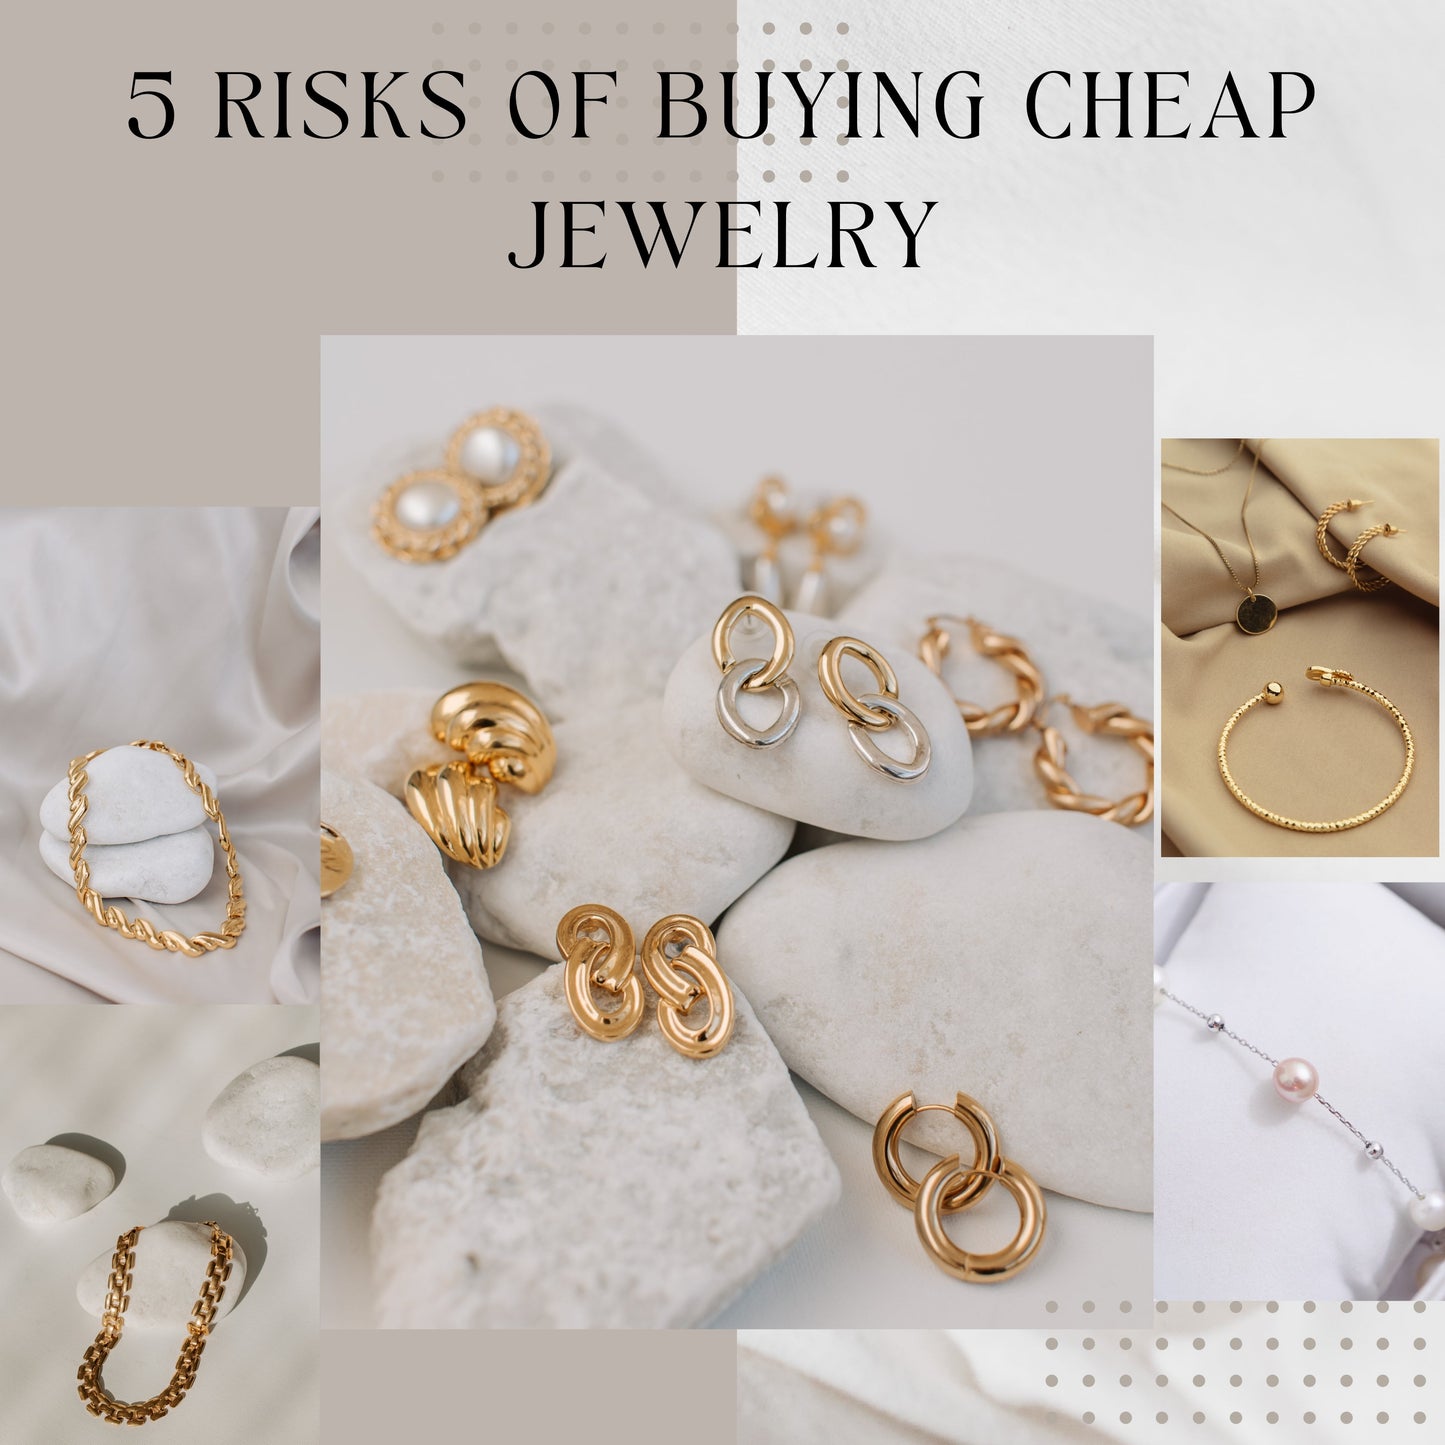 5 Risks of Buying Cheap Jewelry